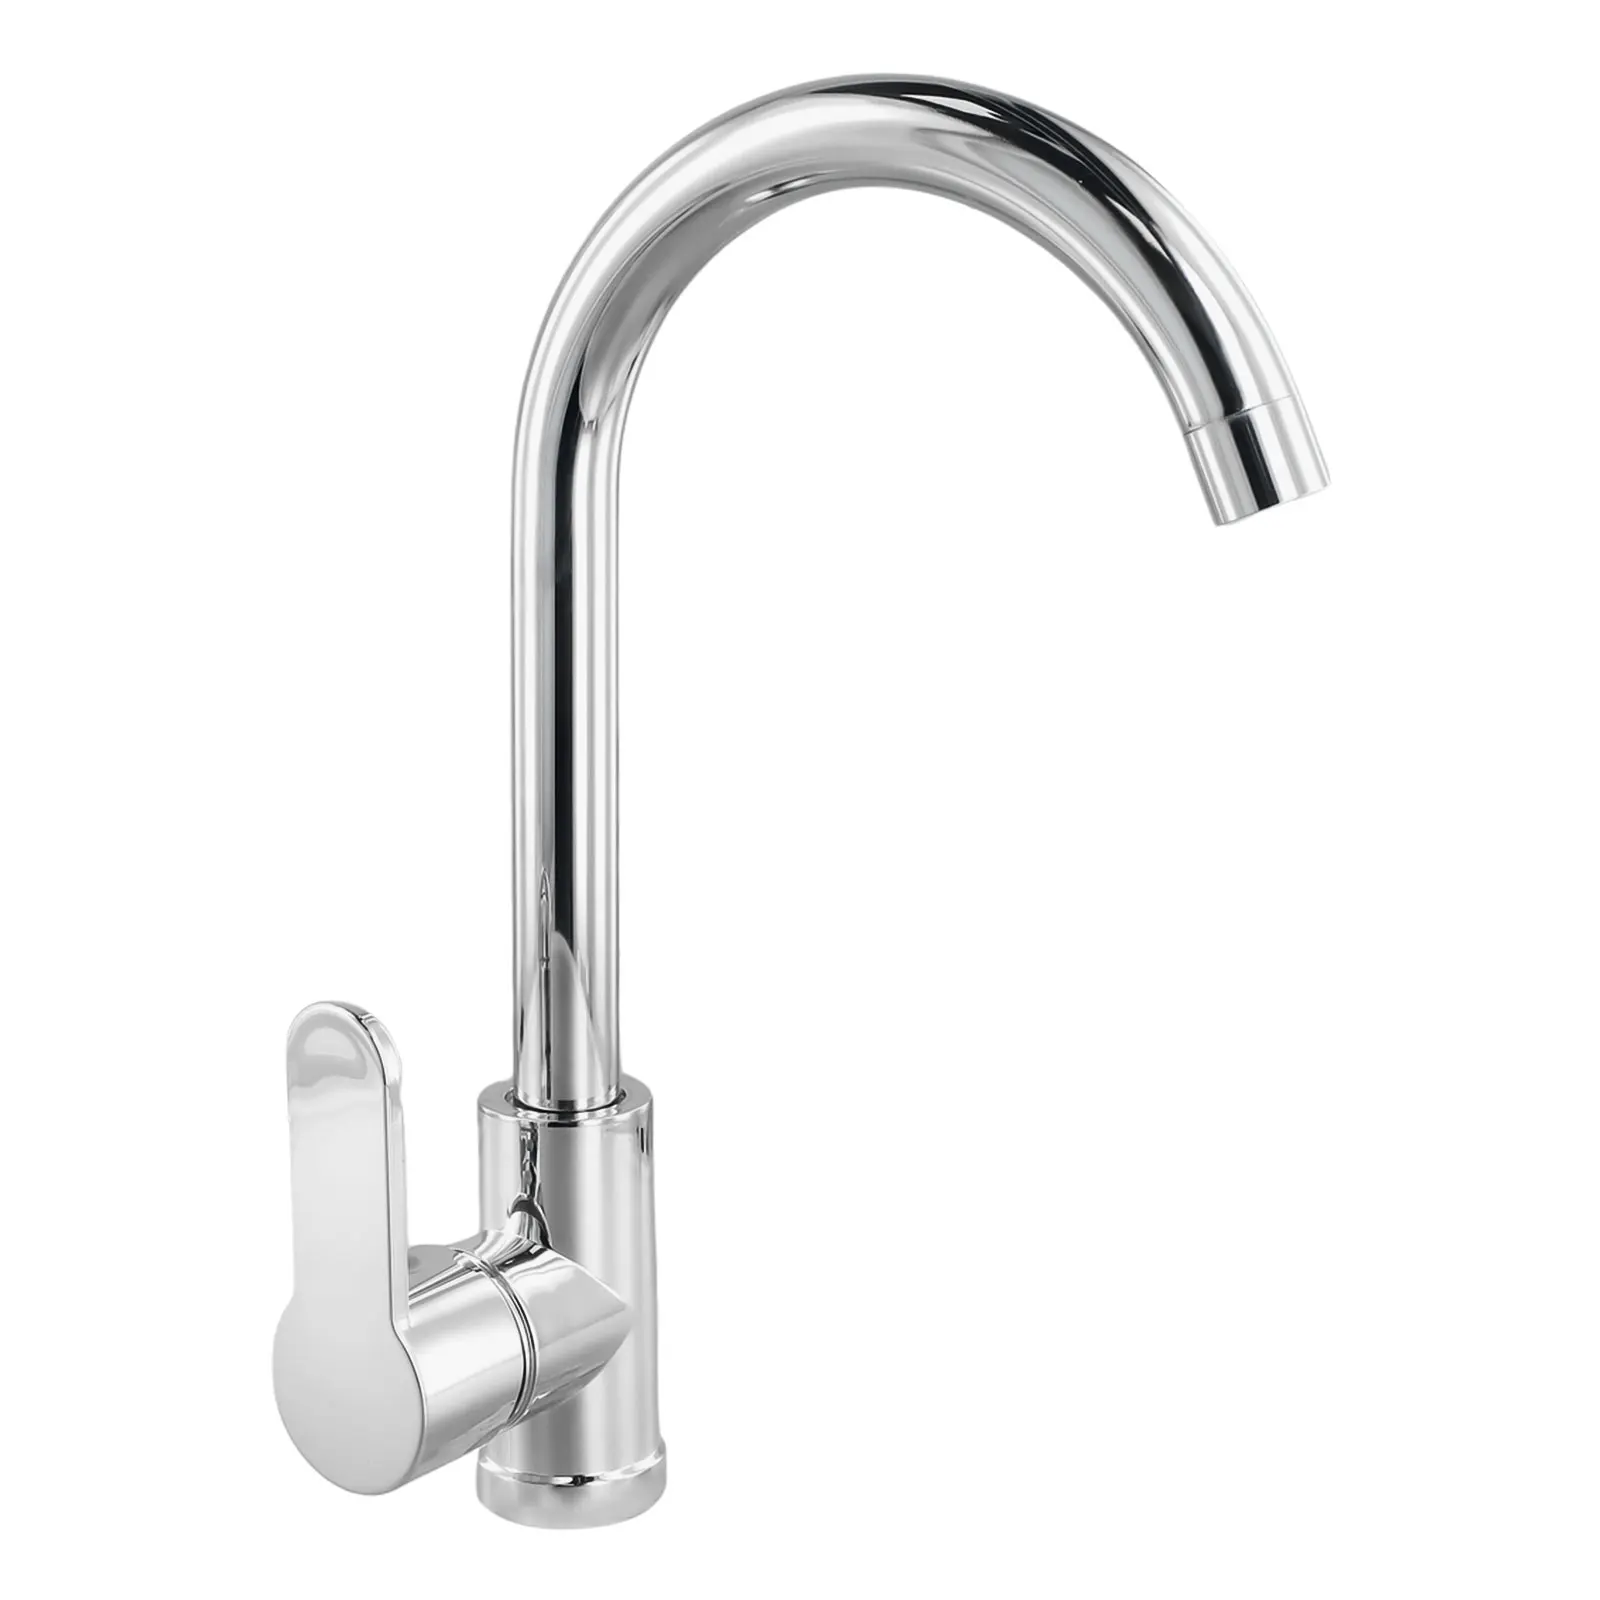 Stainless Steel Kitchen Faucet Polished Chrome Plated Swivel Basin Sink Cold Hot Easy To Operate Mixer Tap xunshini waterfall basin faucet bathroom faucet vanity vessel sinks mixer tap cold and hot deck mount basin washing taps